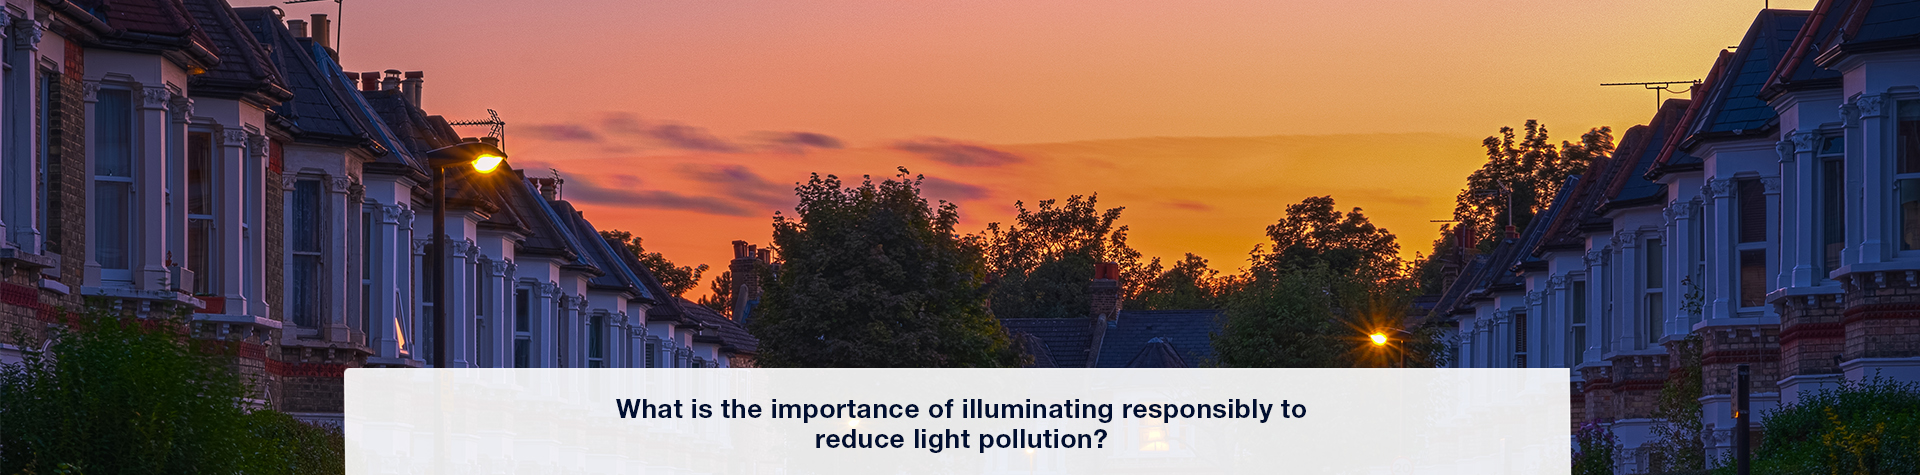 Show products in category Illuminate Responsibly and Reduce Light Pollution